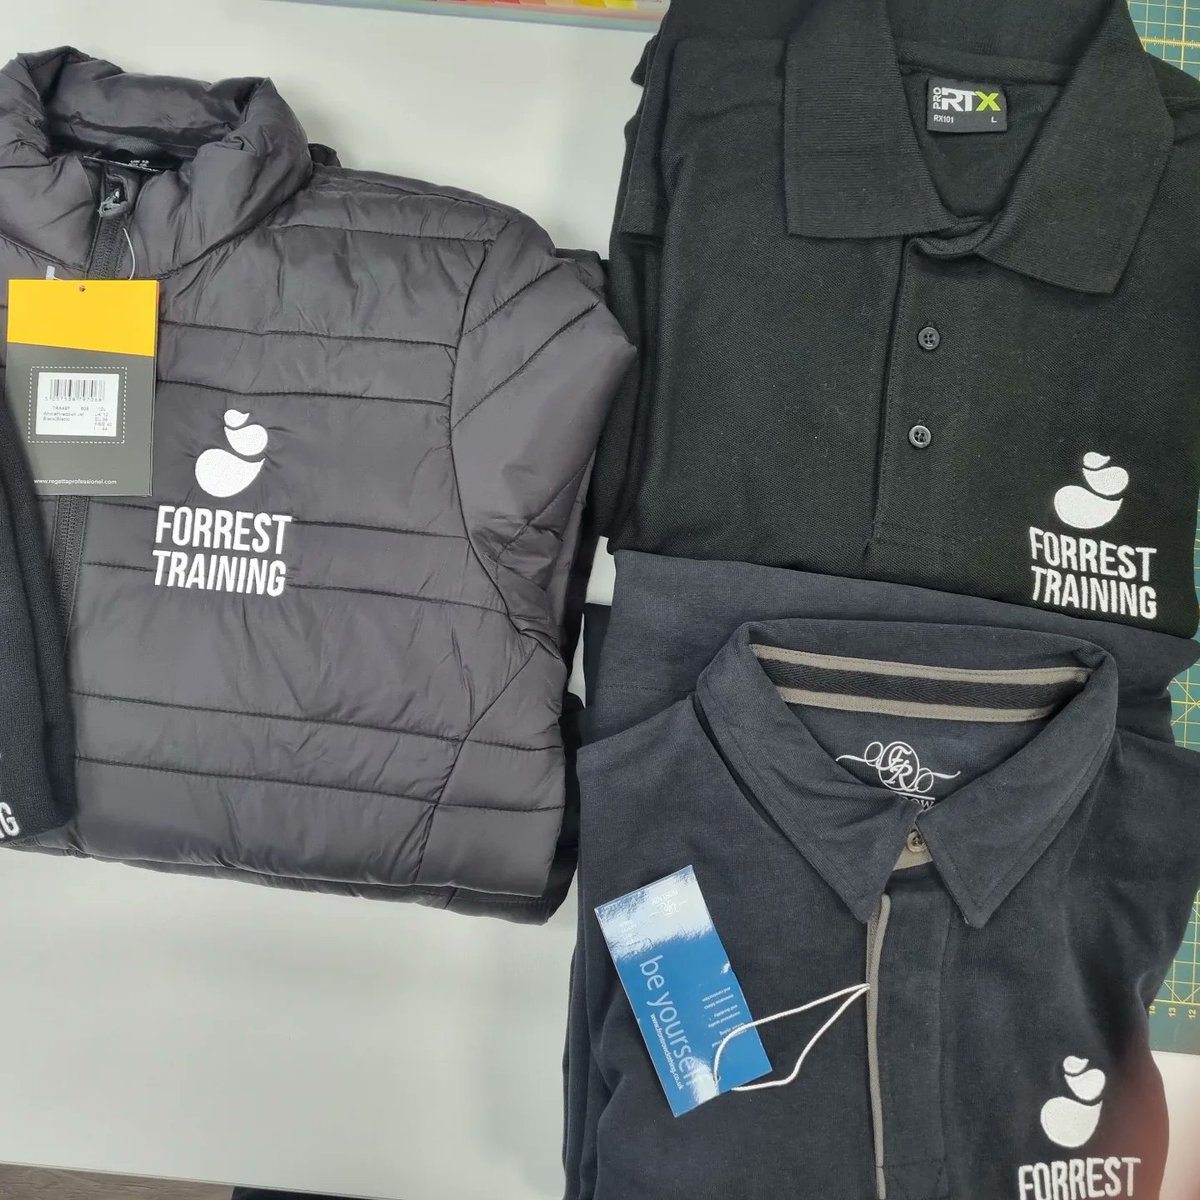 Embroidered polo shirts, rugby style tops and jackets for the team at @forresttraining 

Thanks for using us again ♥️

#embroidery #forresttraining #firstaid #trainingcoursesaberdeen #familyrun #mentalhealthcourses #rugbystyletops #poloshirts